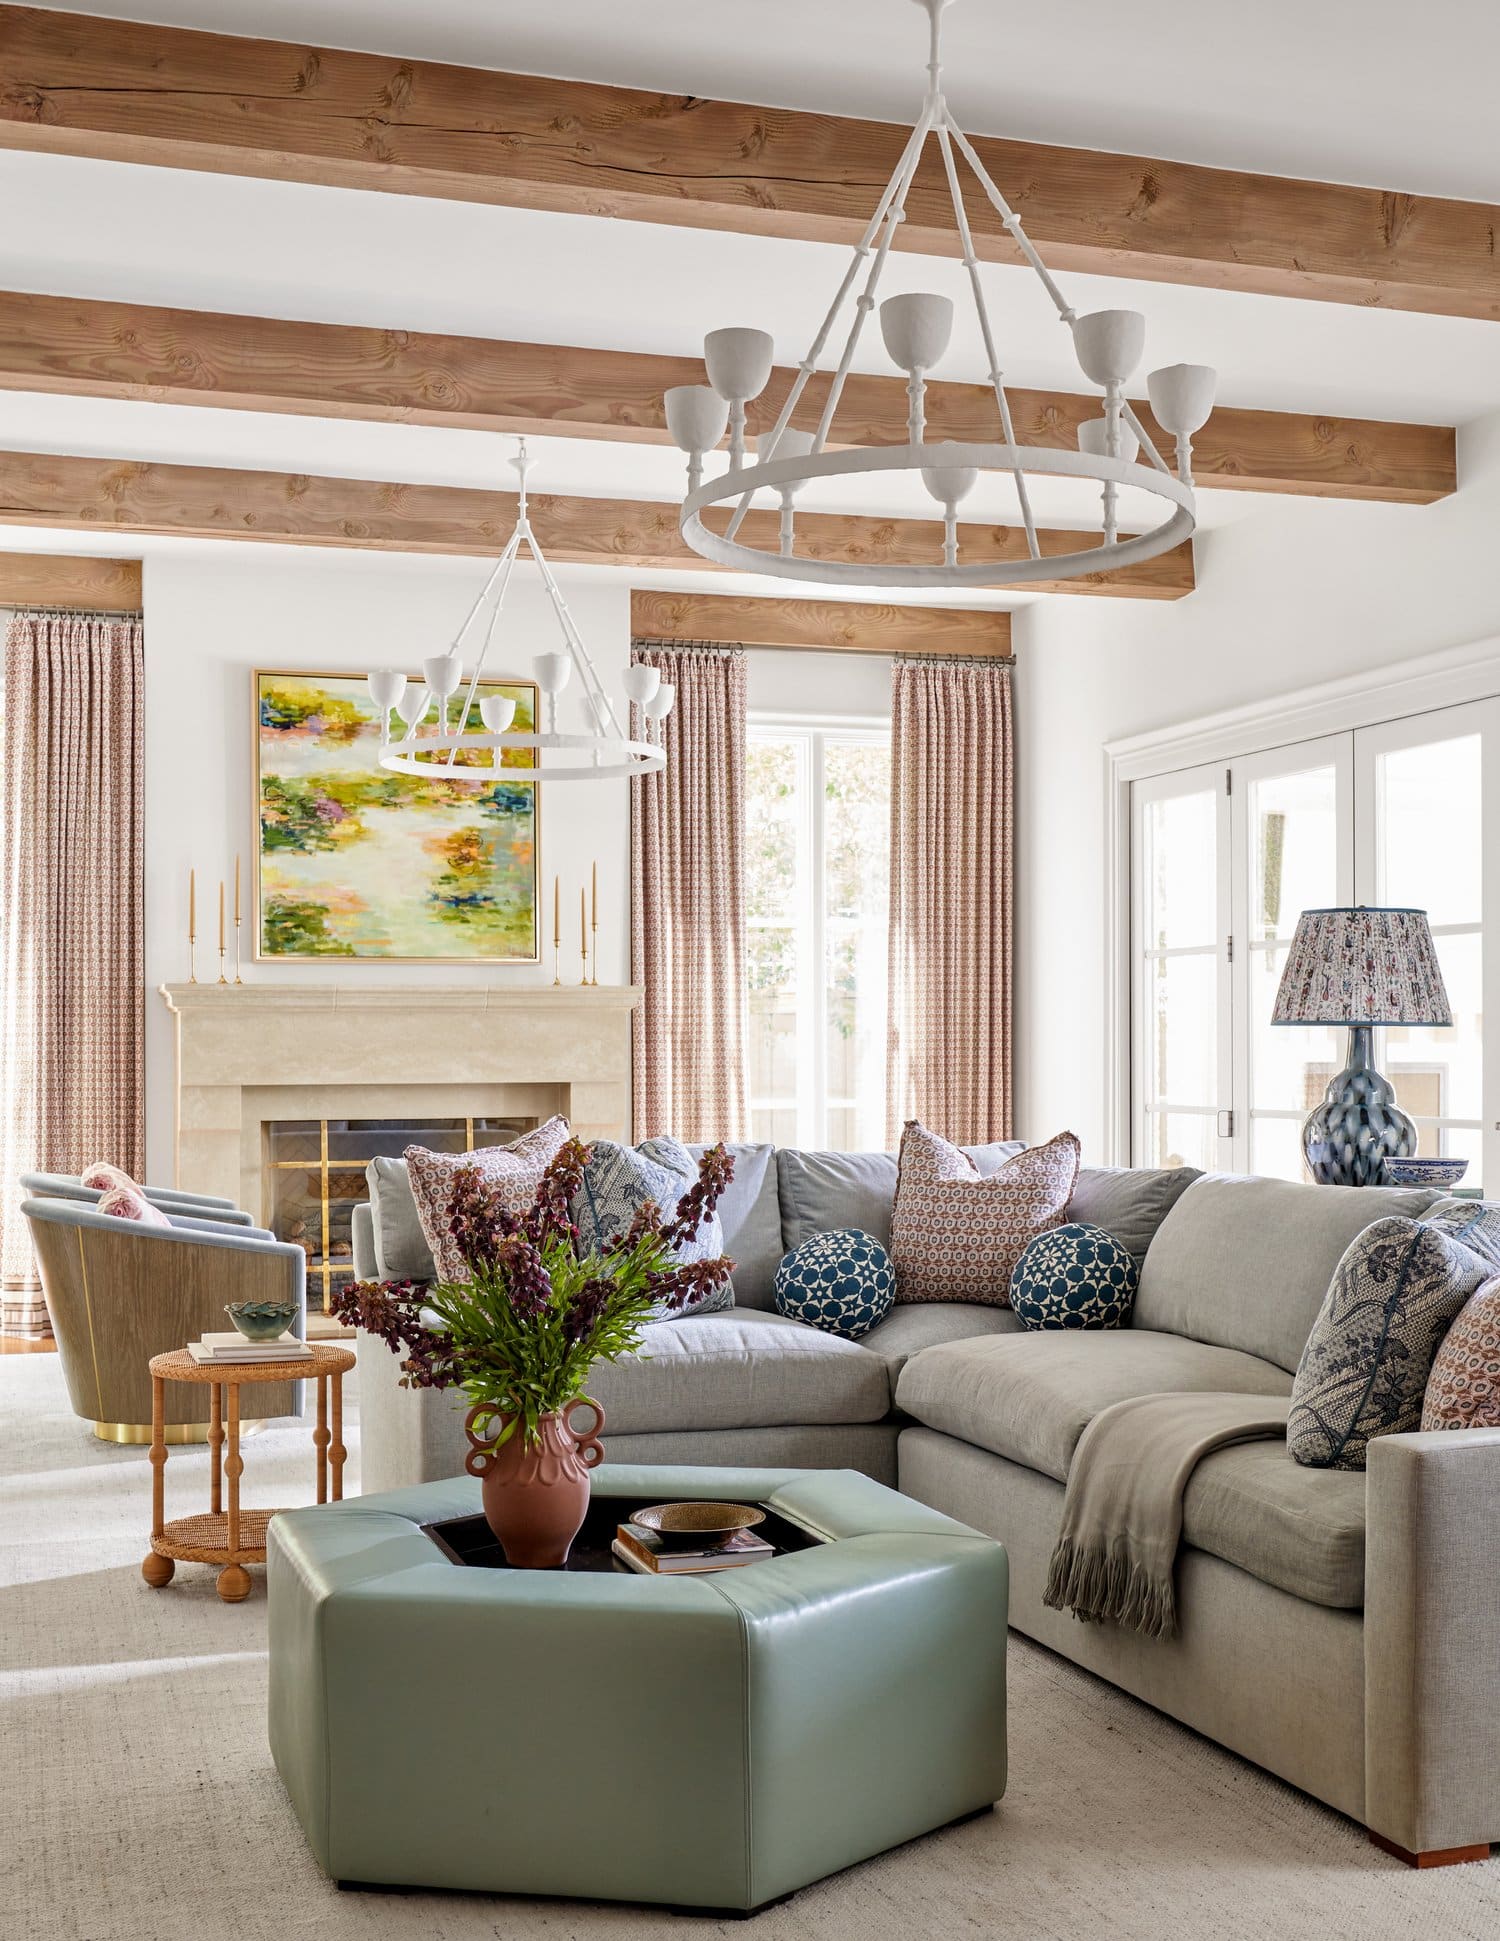 Step inside this gorgeous Dallas home designed by the talented Mary Beth Wagner Interiors beautifully photographed by Nathan Schroder that seamlessly marries the best of both contemporary and traditional design elements.